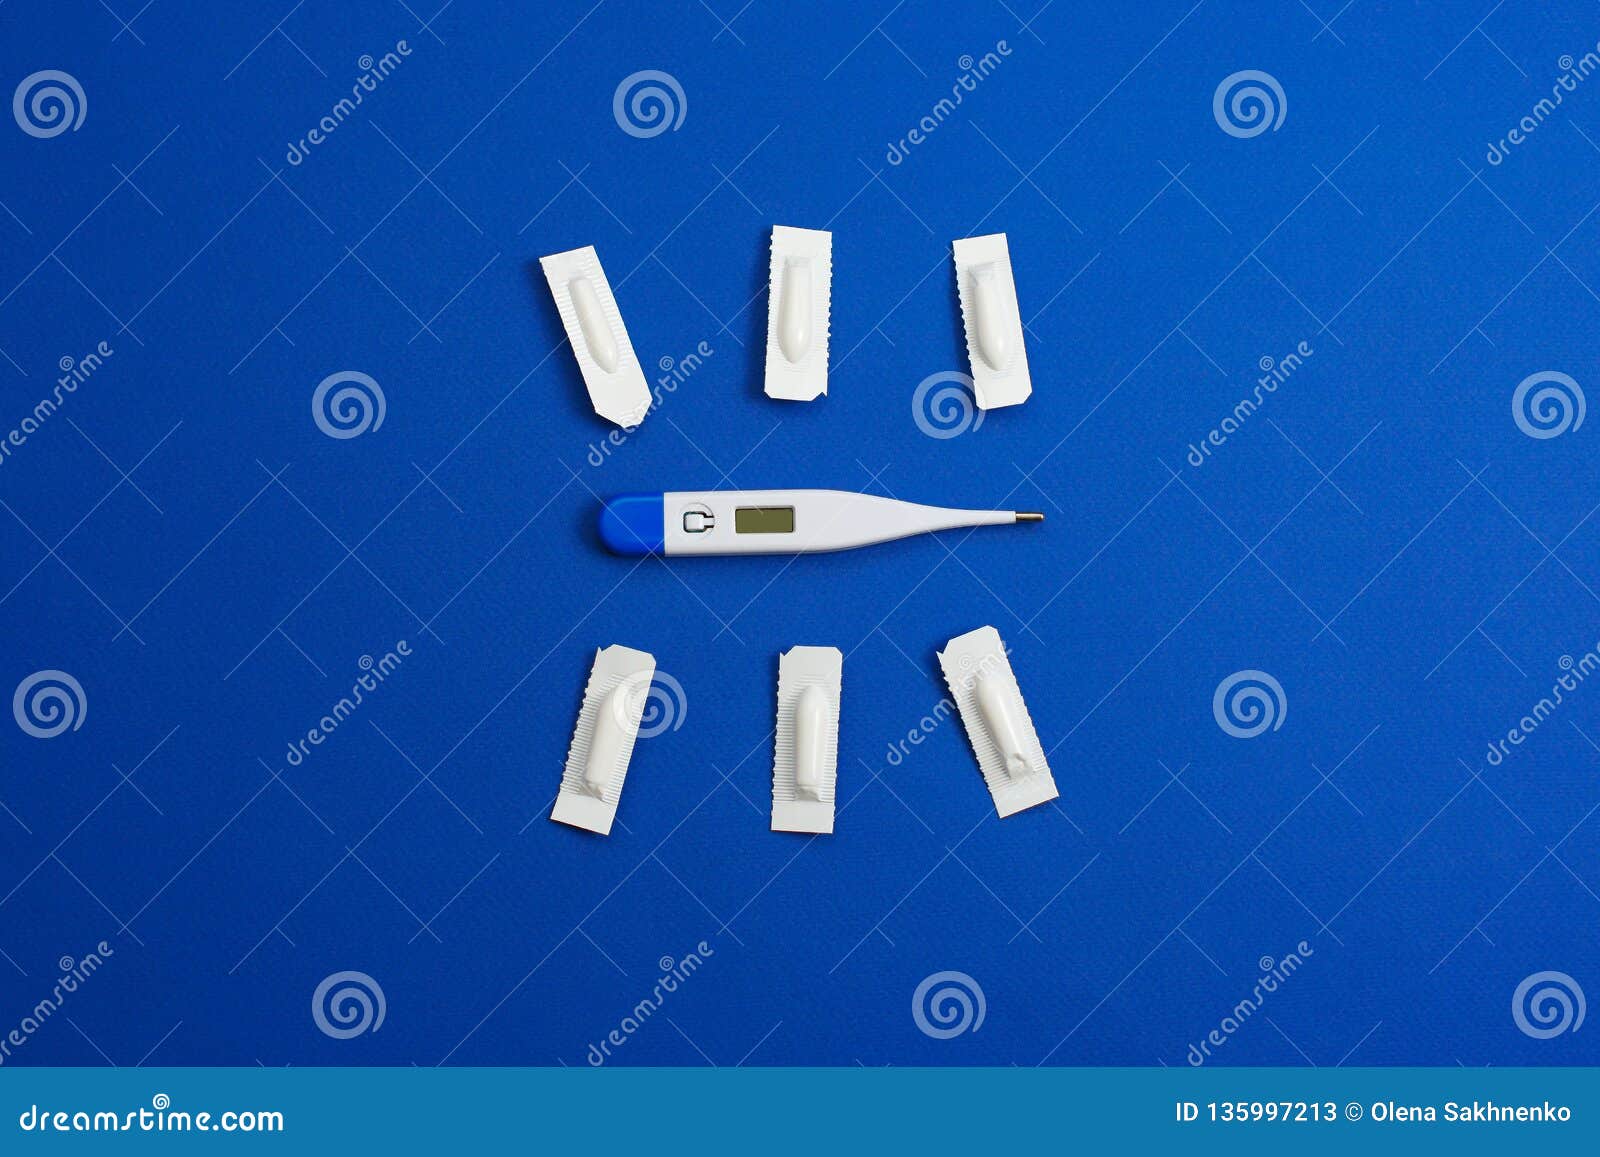 Medical Suppository For Anal Or Vaginal Use And Thermometer Candles